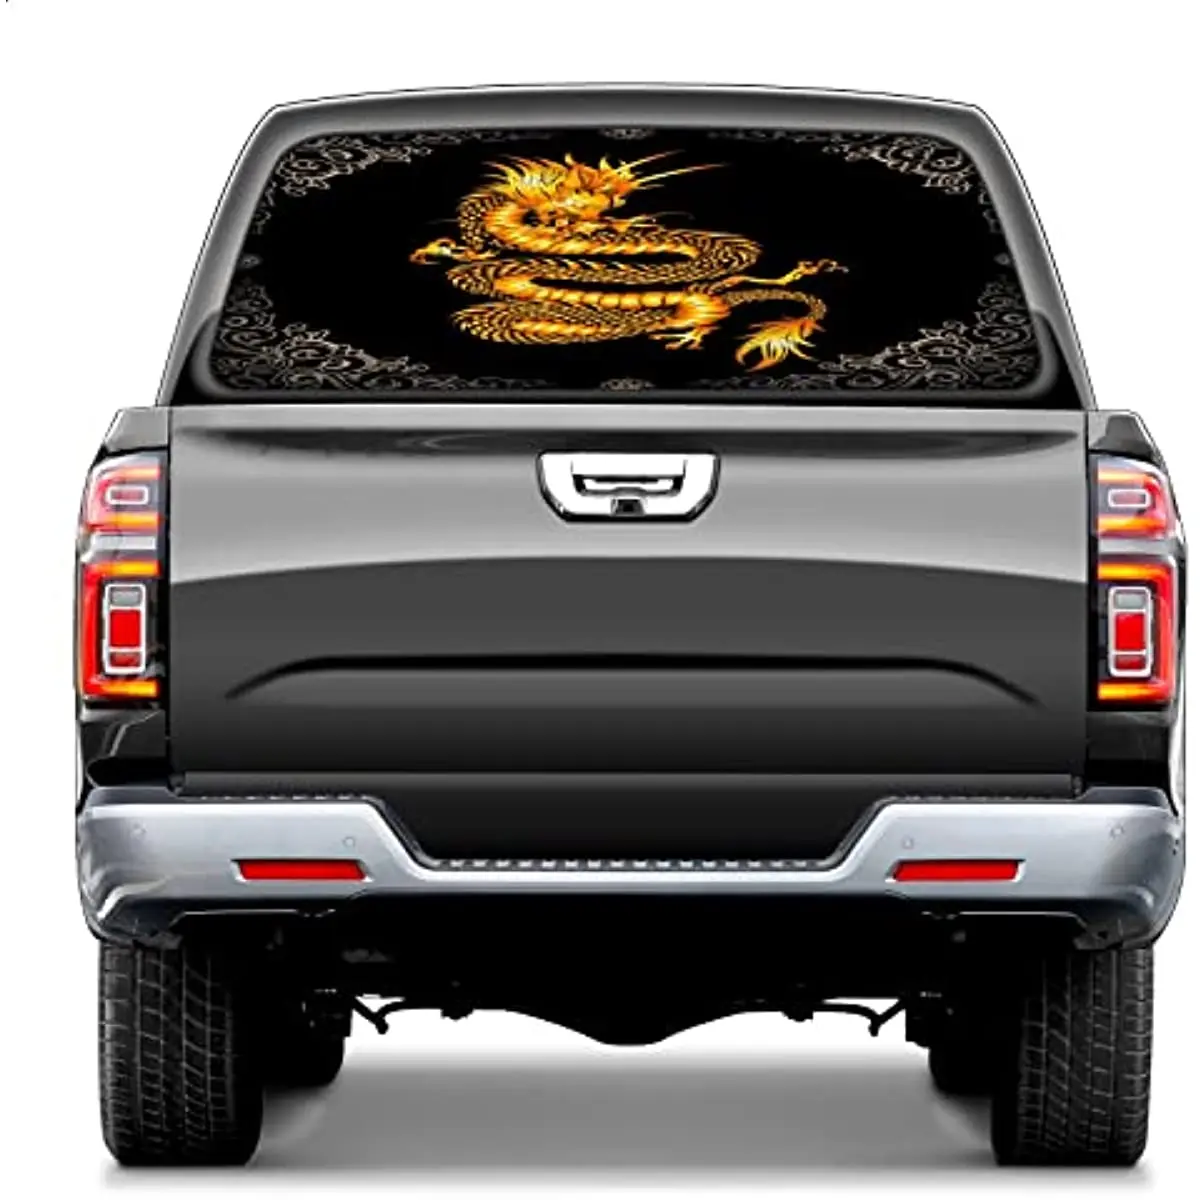 

Rear Window Decals for Trucks,Pickup Truck Back Window Tint Graphic Perforated Vinyl Truck Stickers 66"X 22" Chinese Dragon Pick